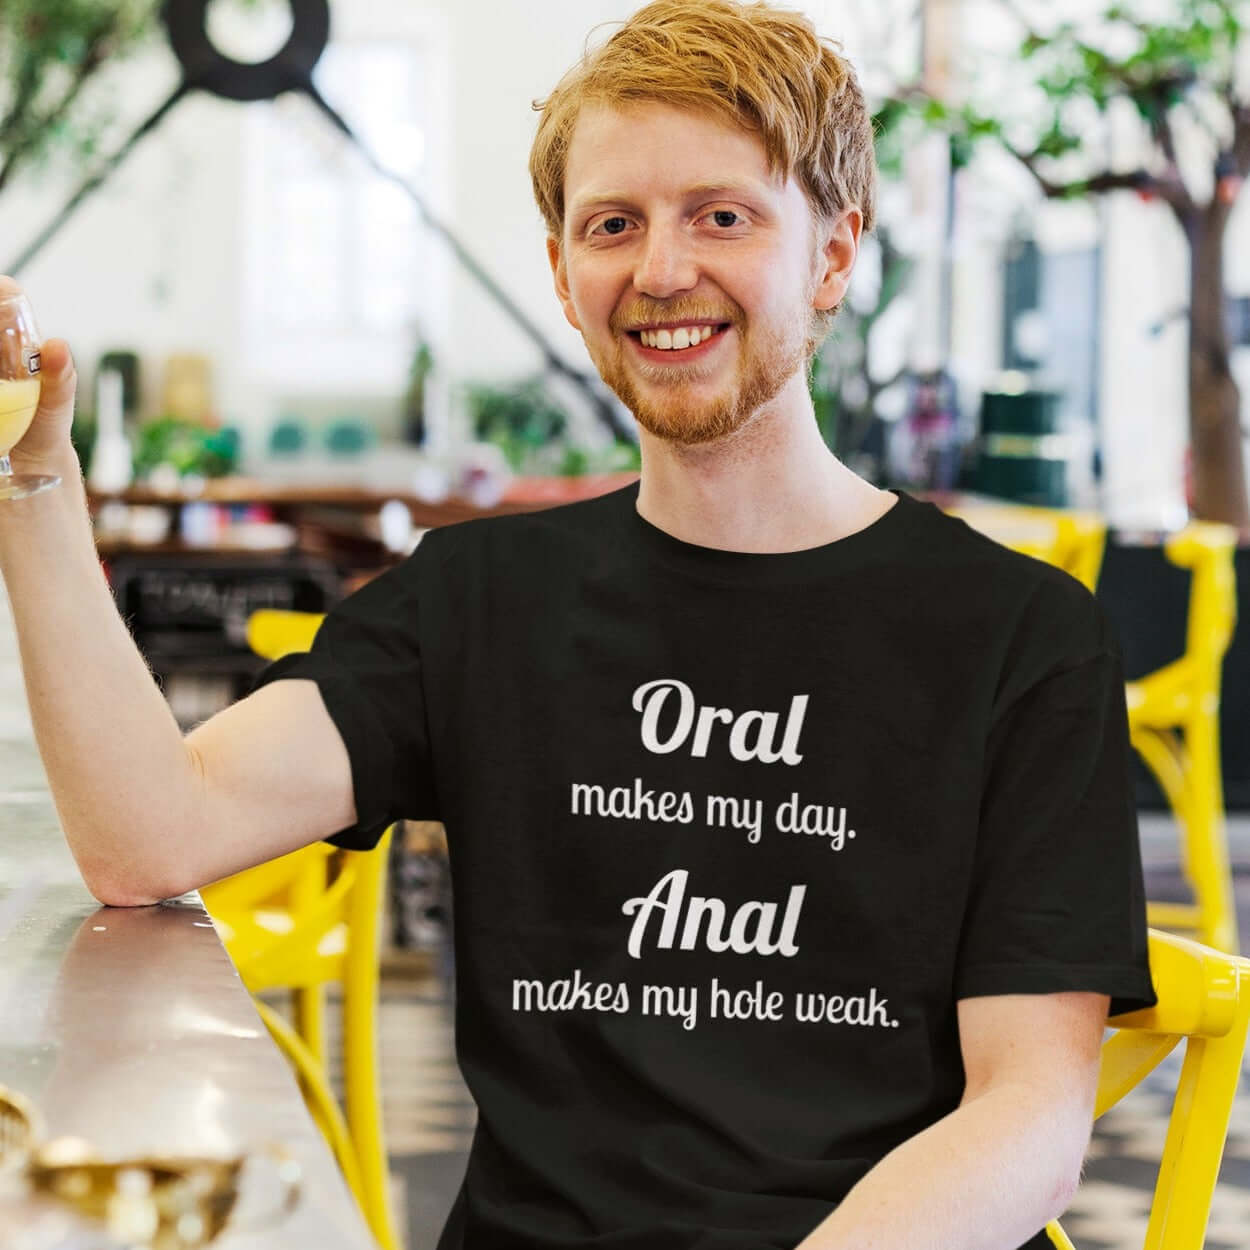 Man sitting at a cafe table wearing a black t-shirt with the pun phrase Oral makes my day Anal makes my hole weak printed on the front.